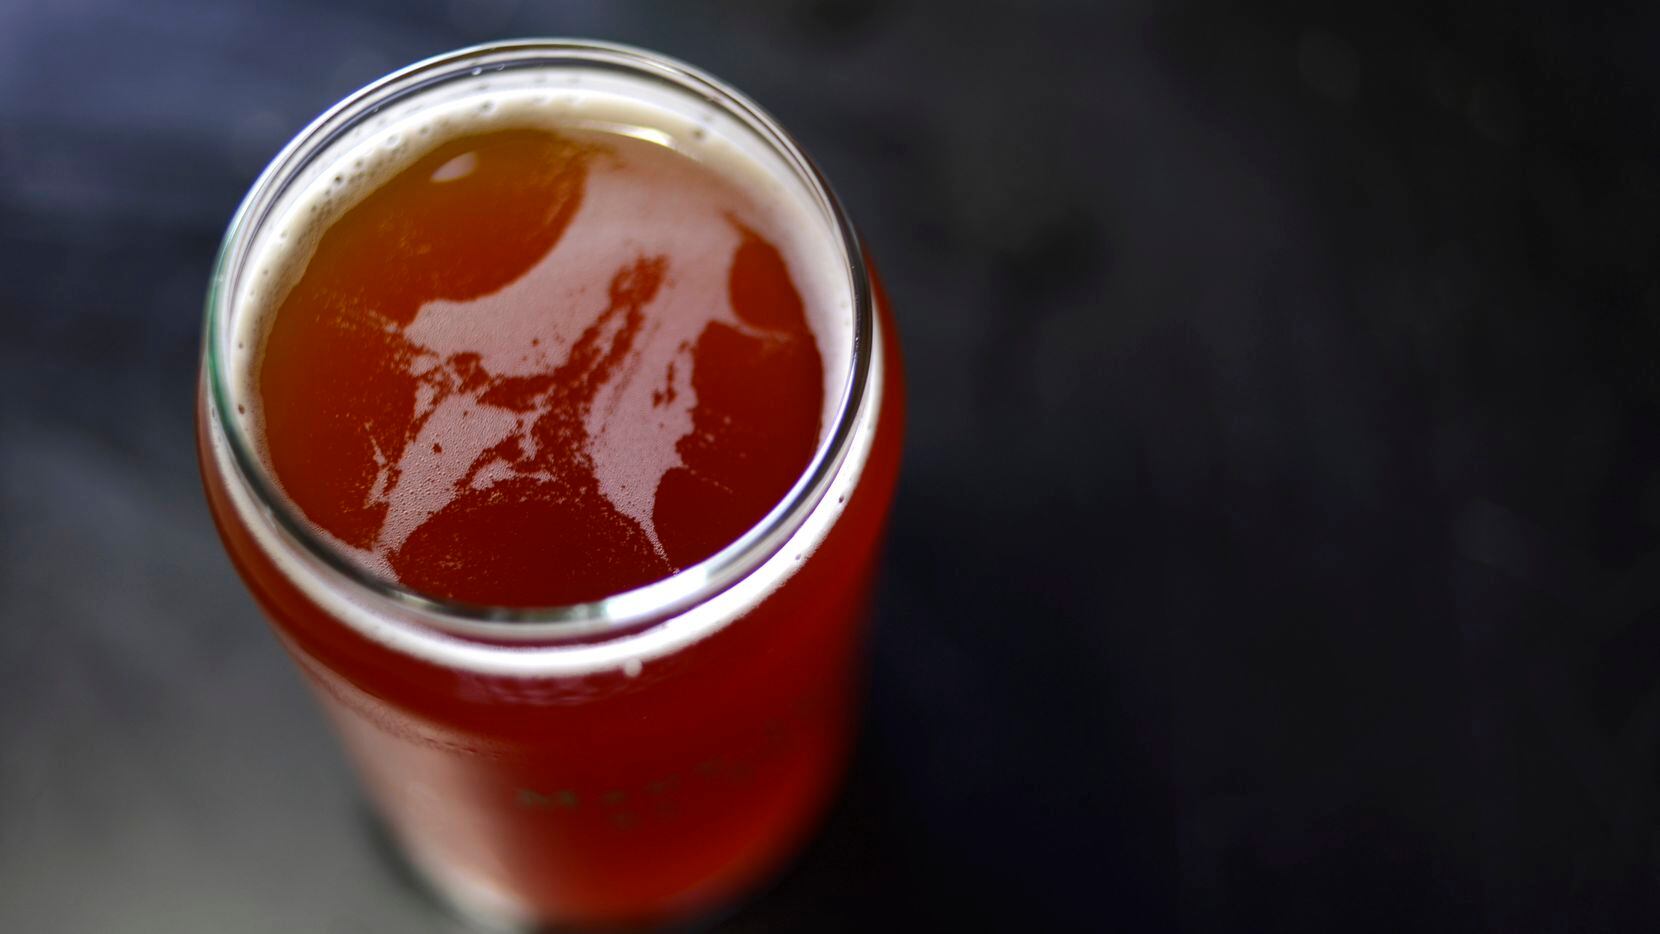 A freshly poured glass of beer at a tasting event held by Martin House Brewing Company in Fort Worth, Texas on Saturday, Sept. 13, 2014.